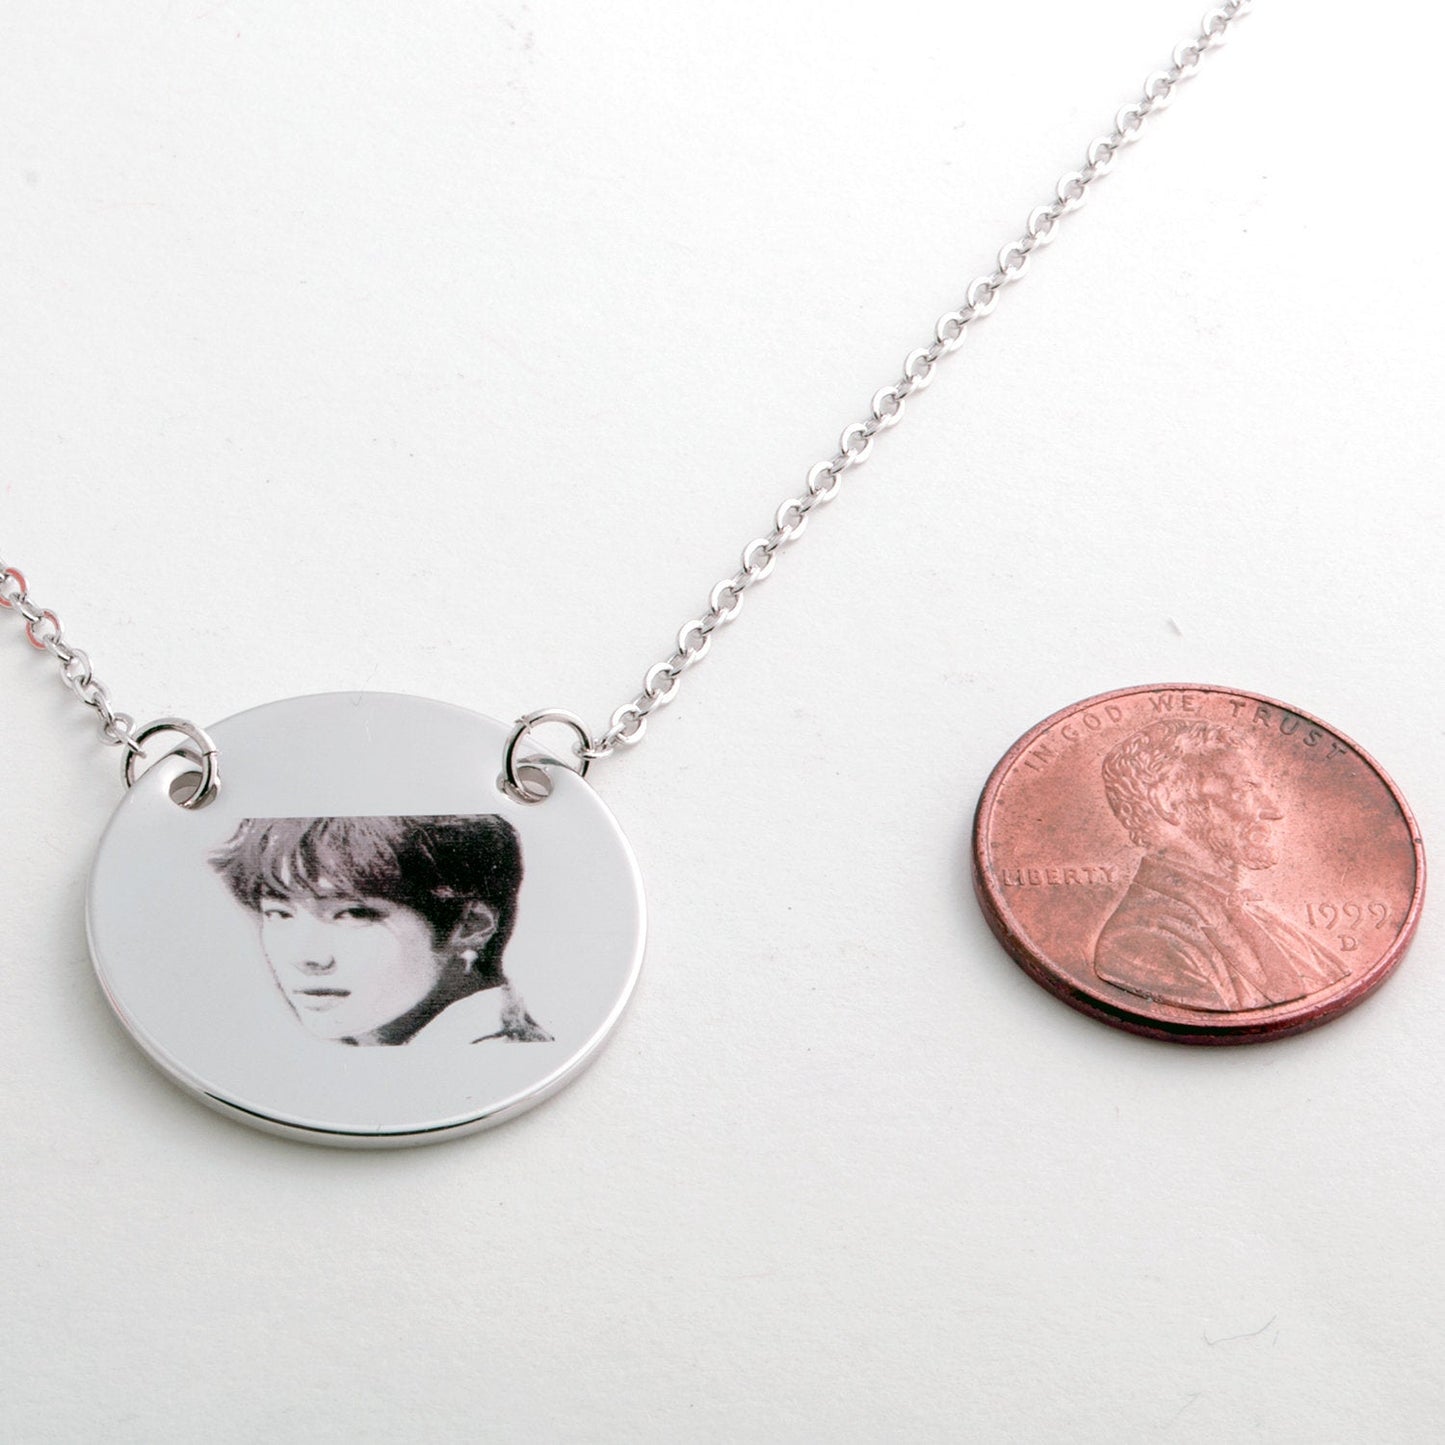 Buy BTS Love=Army Fan Necklace at Petite Boutique